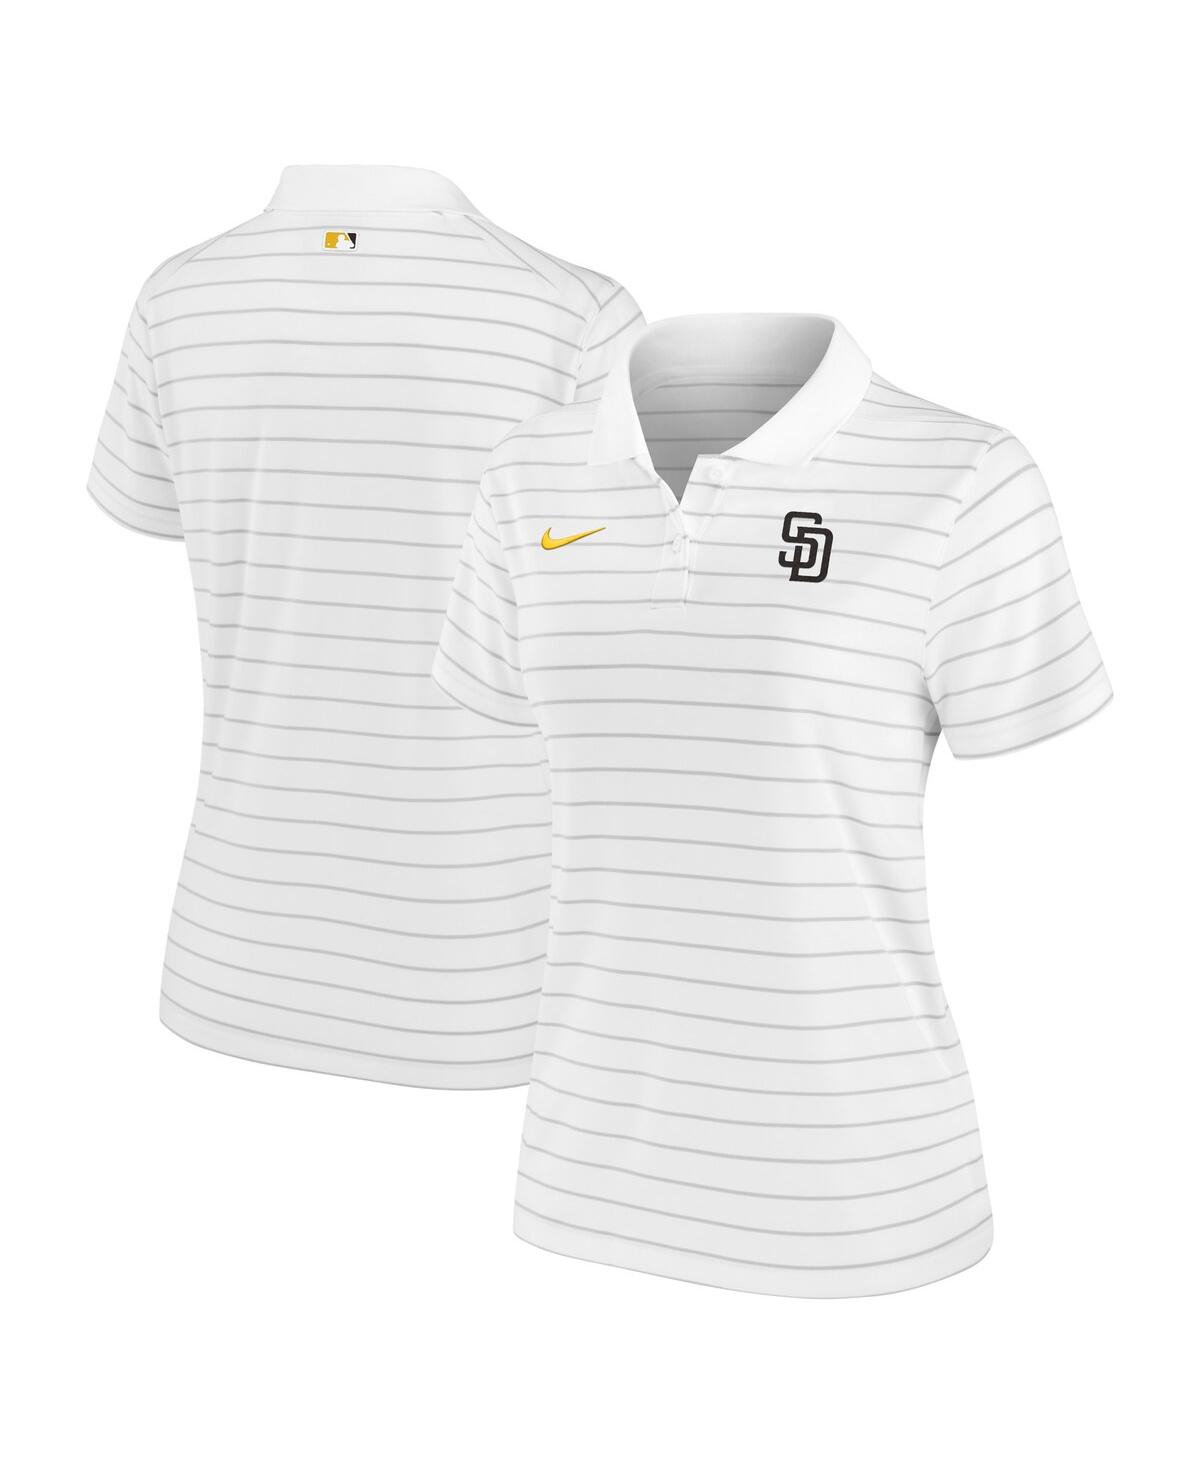 Women's Nike White San Diego Padres Authentic Collection Victory Performance Polo Shirt - White